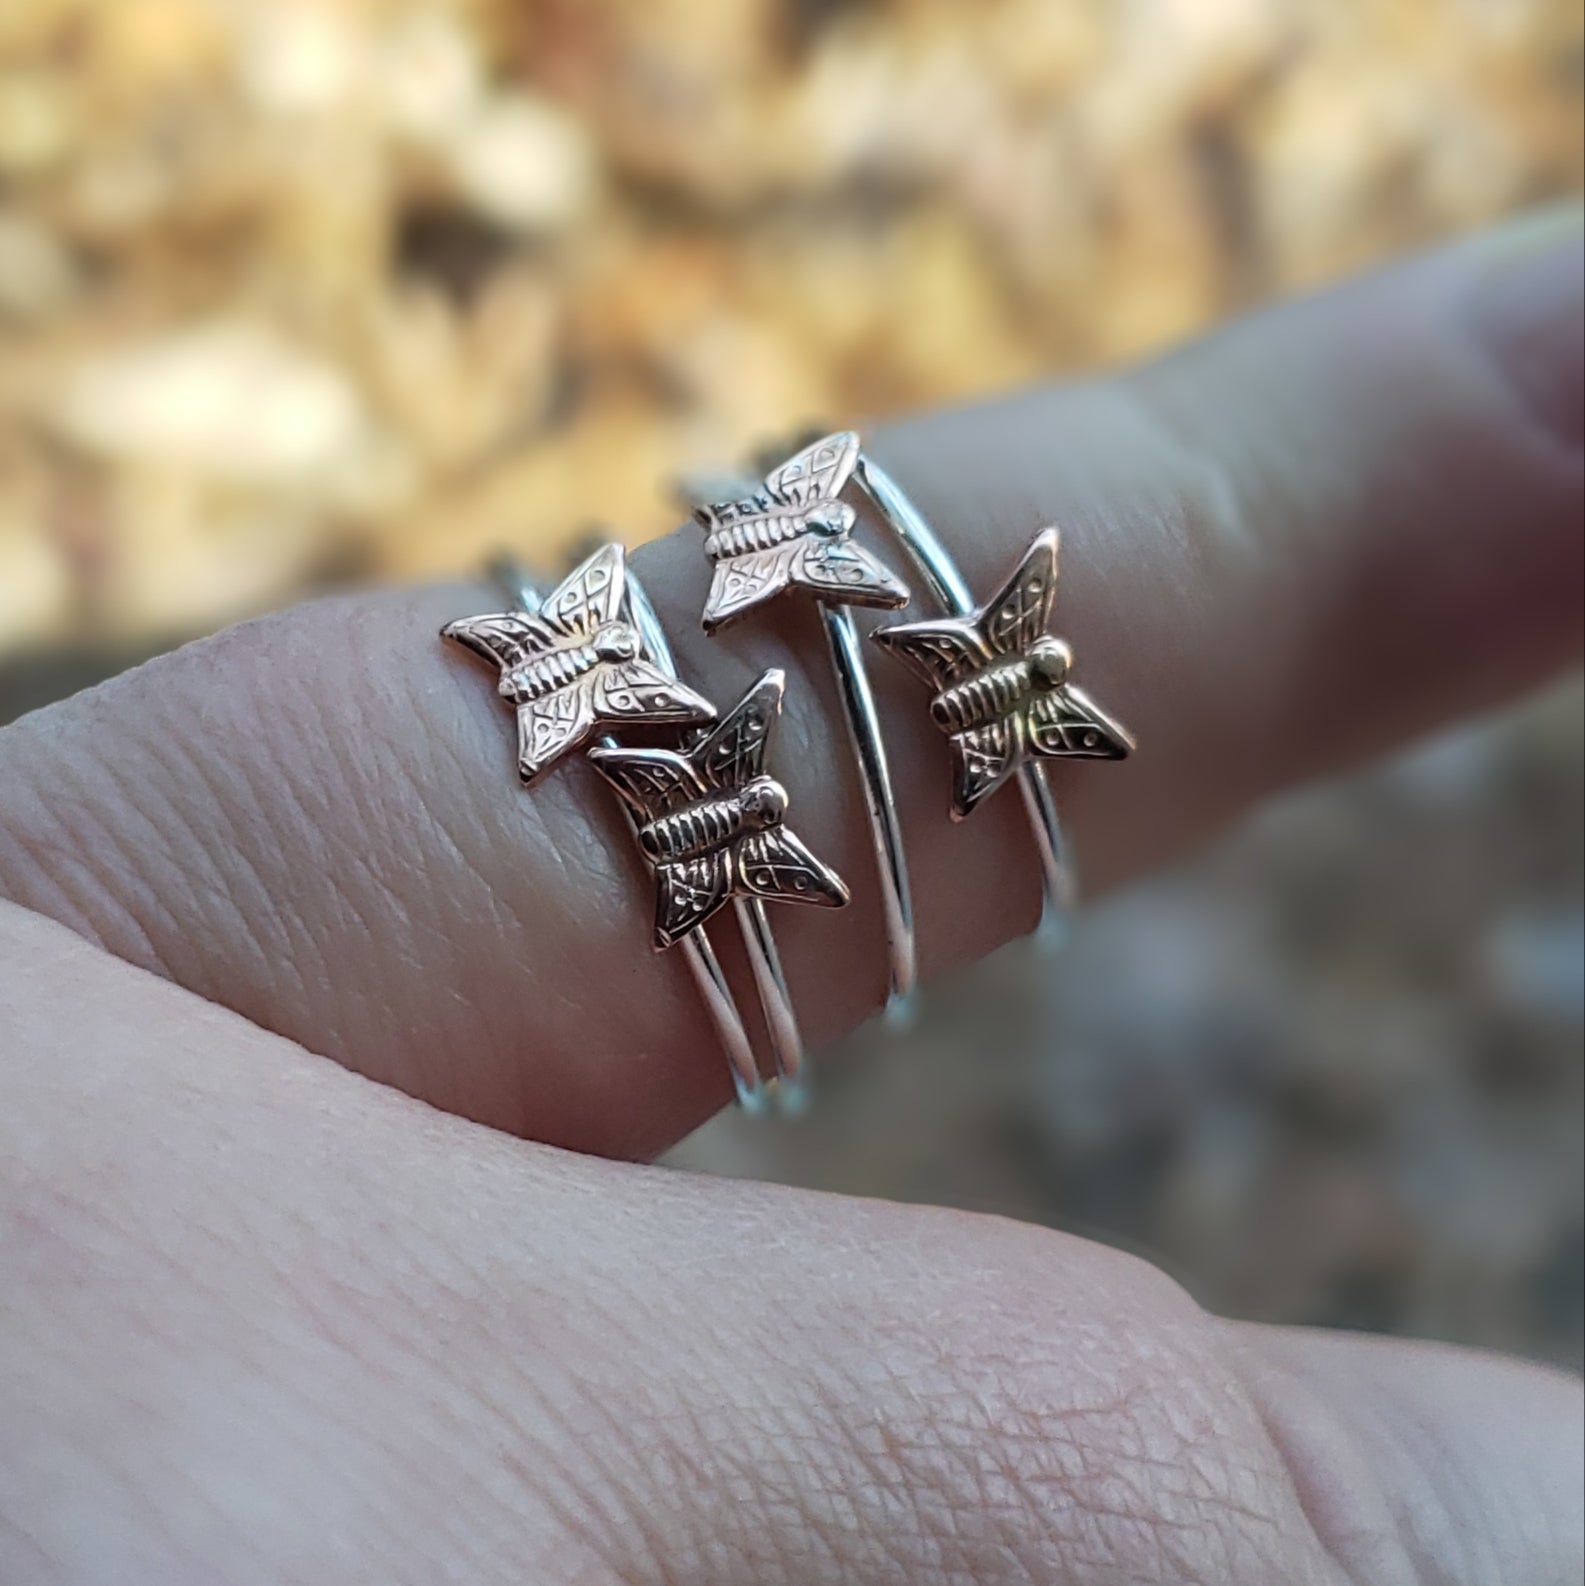 Silver Stacking Ring with Copper Butterfly - Verdilune